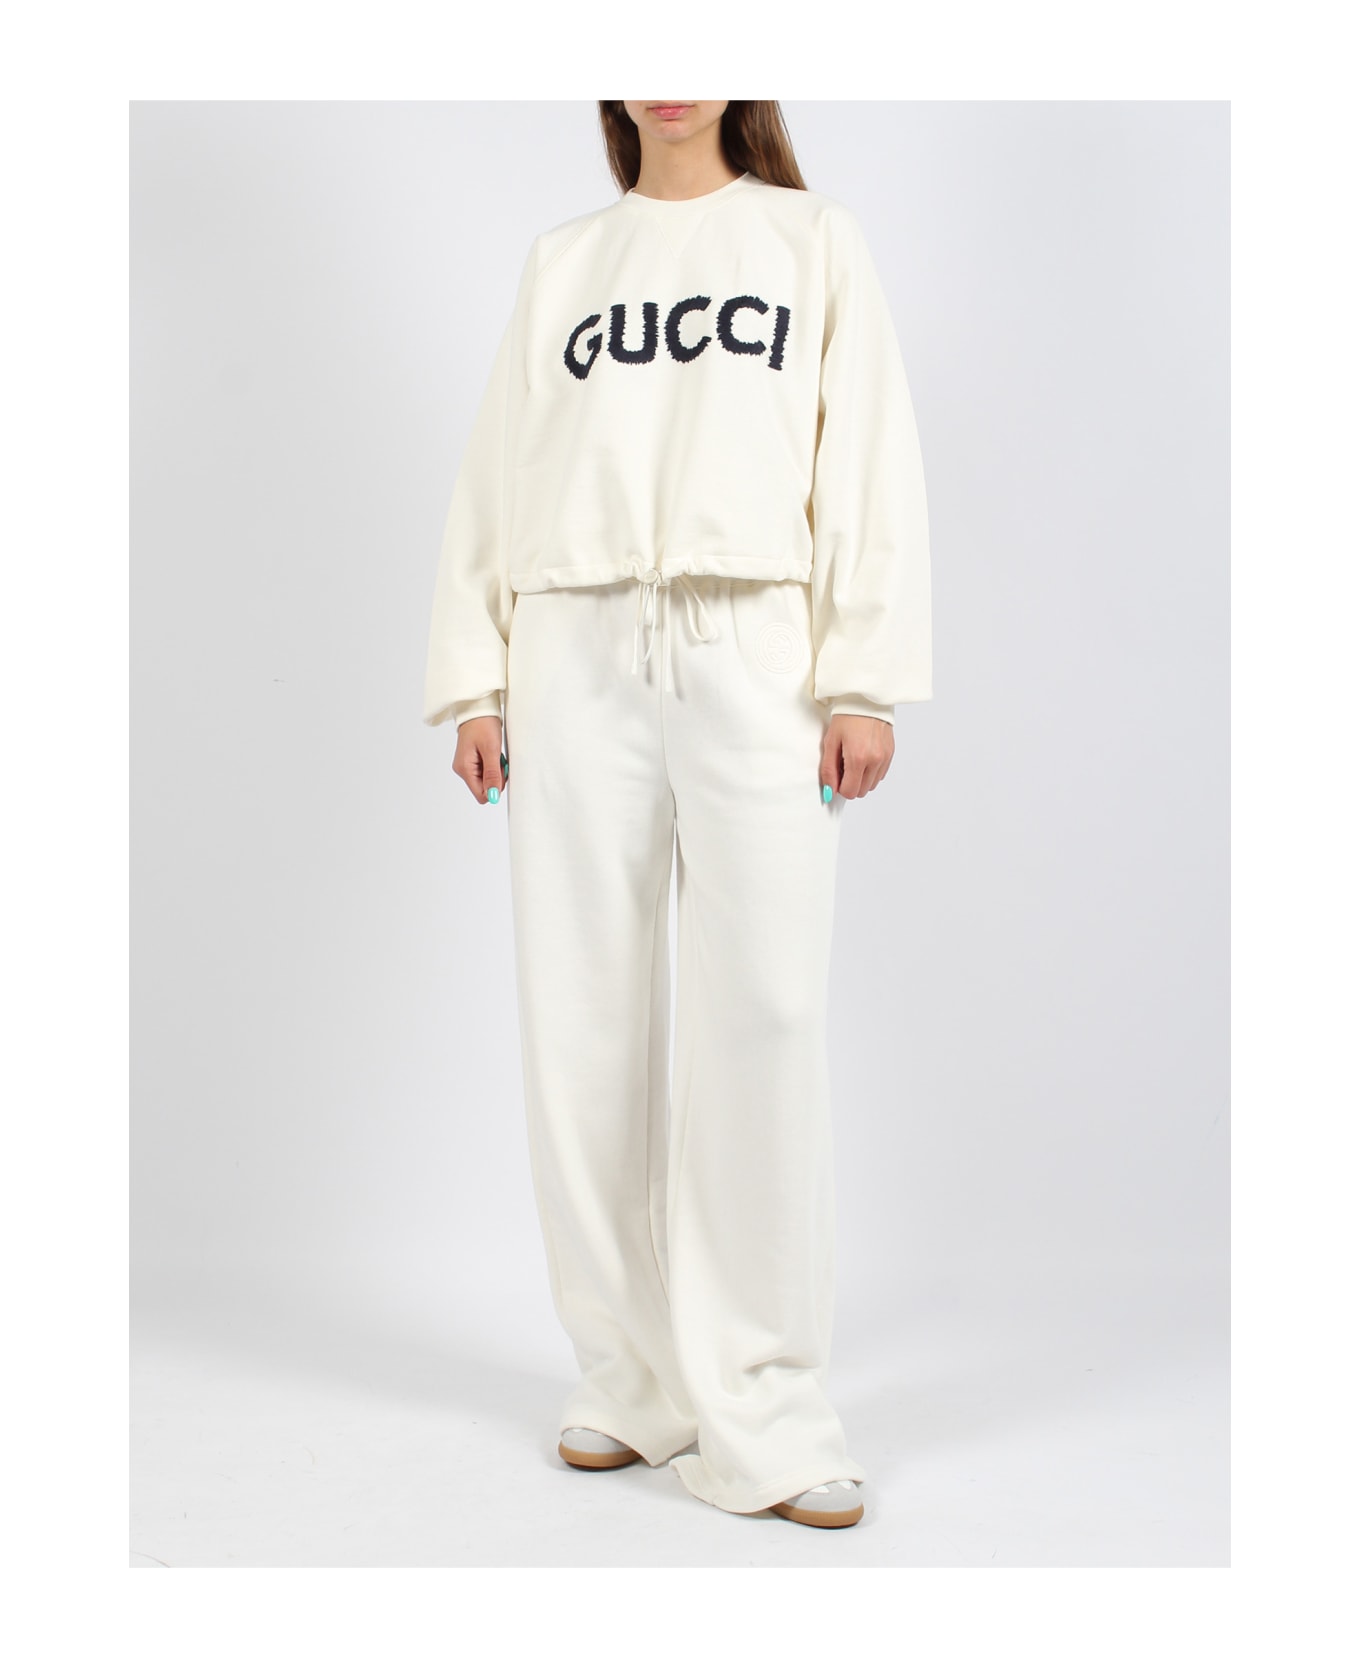 Gucci Embroidered Cotton Jersey Trousers